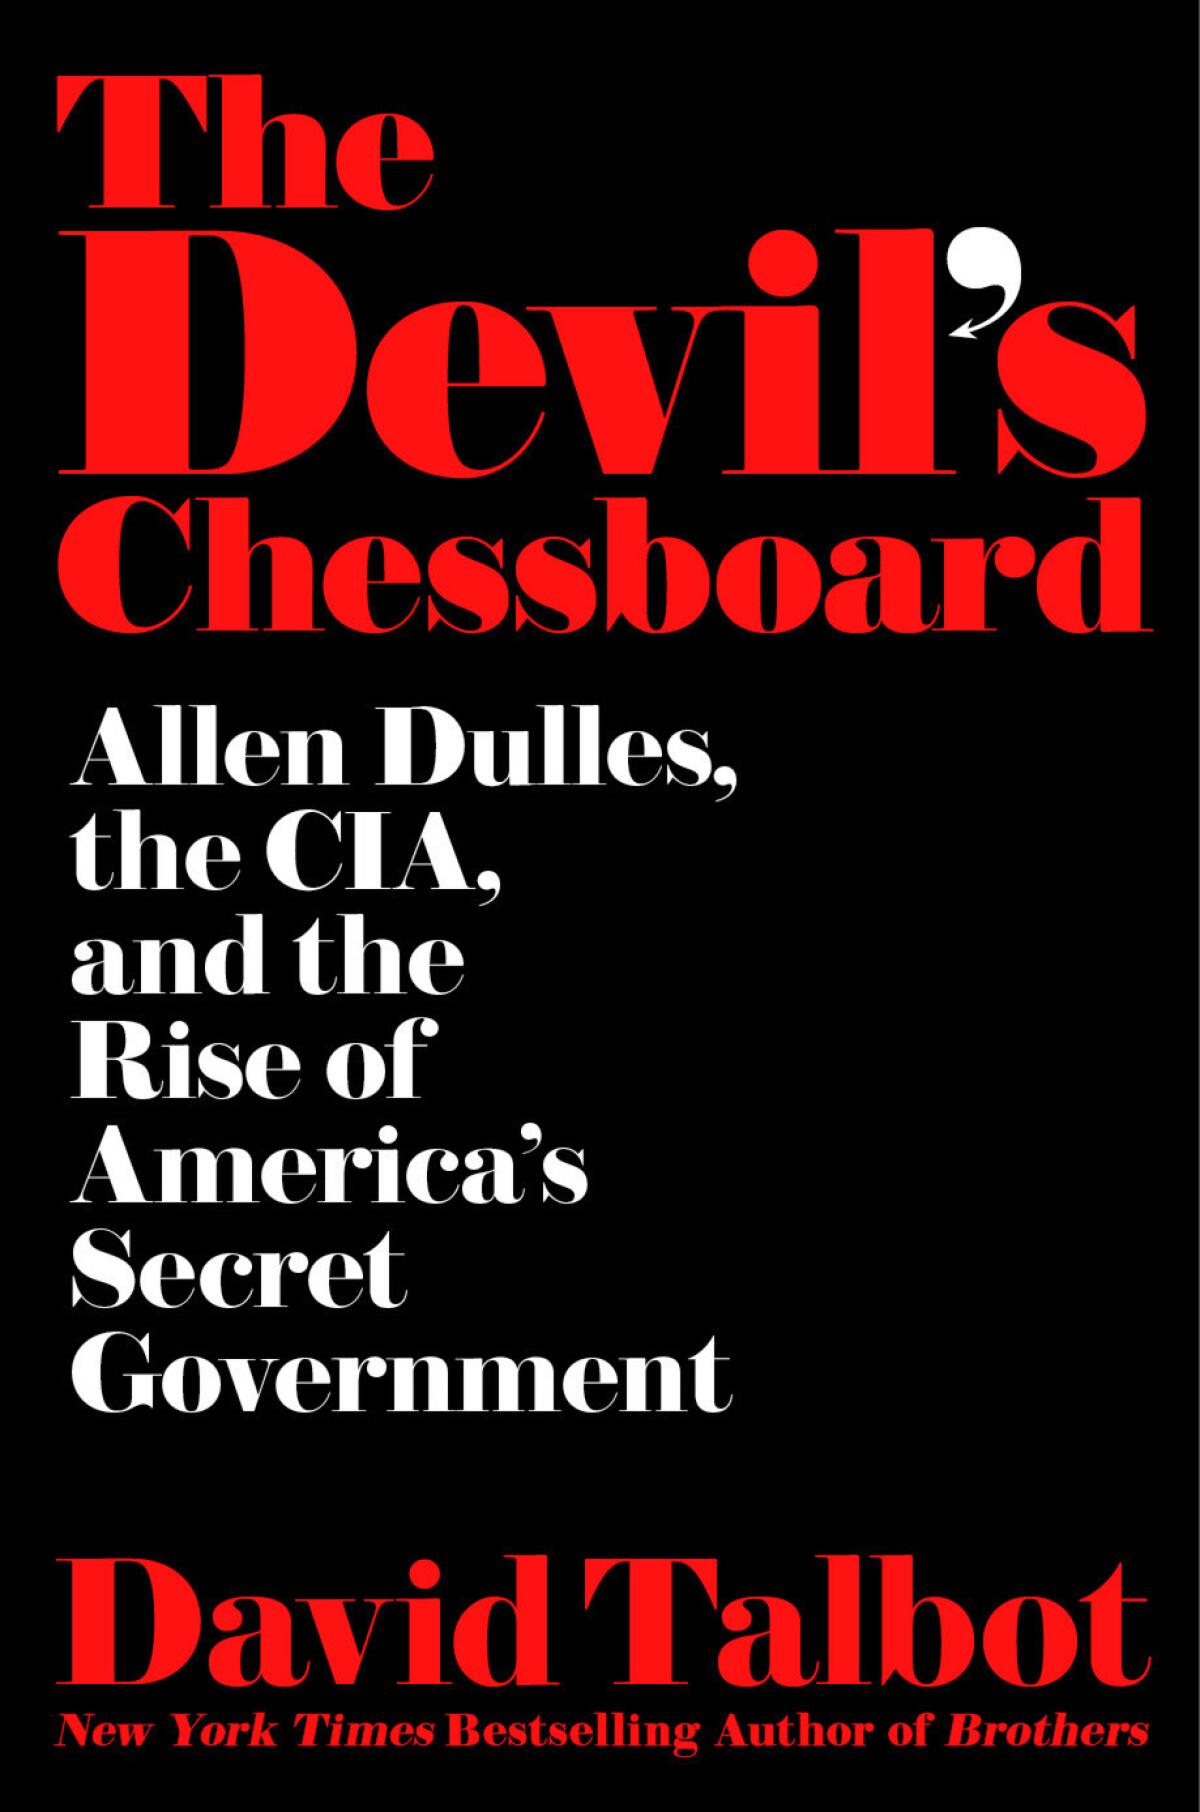 "The Devil’s Chessboard: Allen Dulles, the CIA, and the Rise of America’s Secert Government" by David Talbot